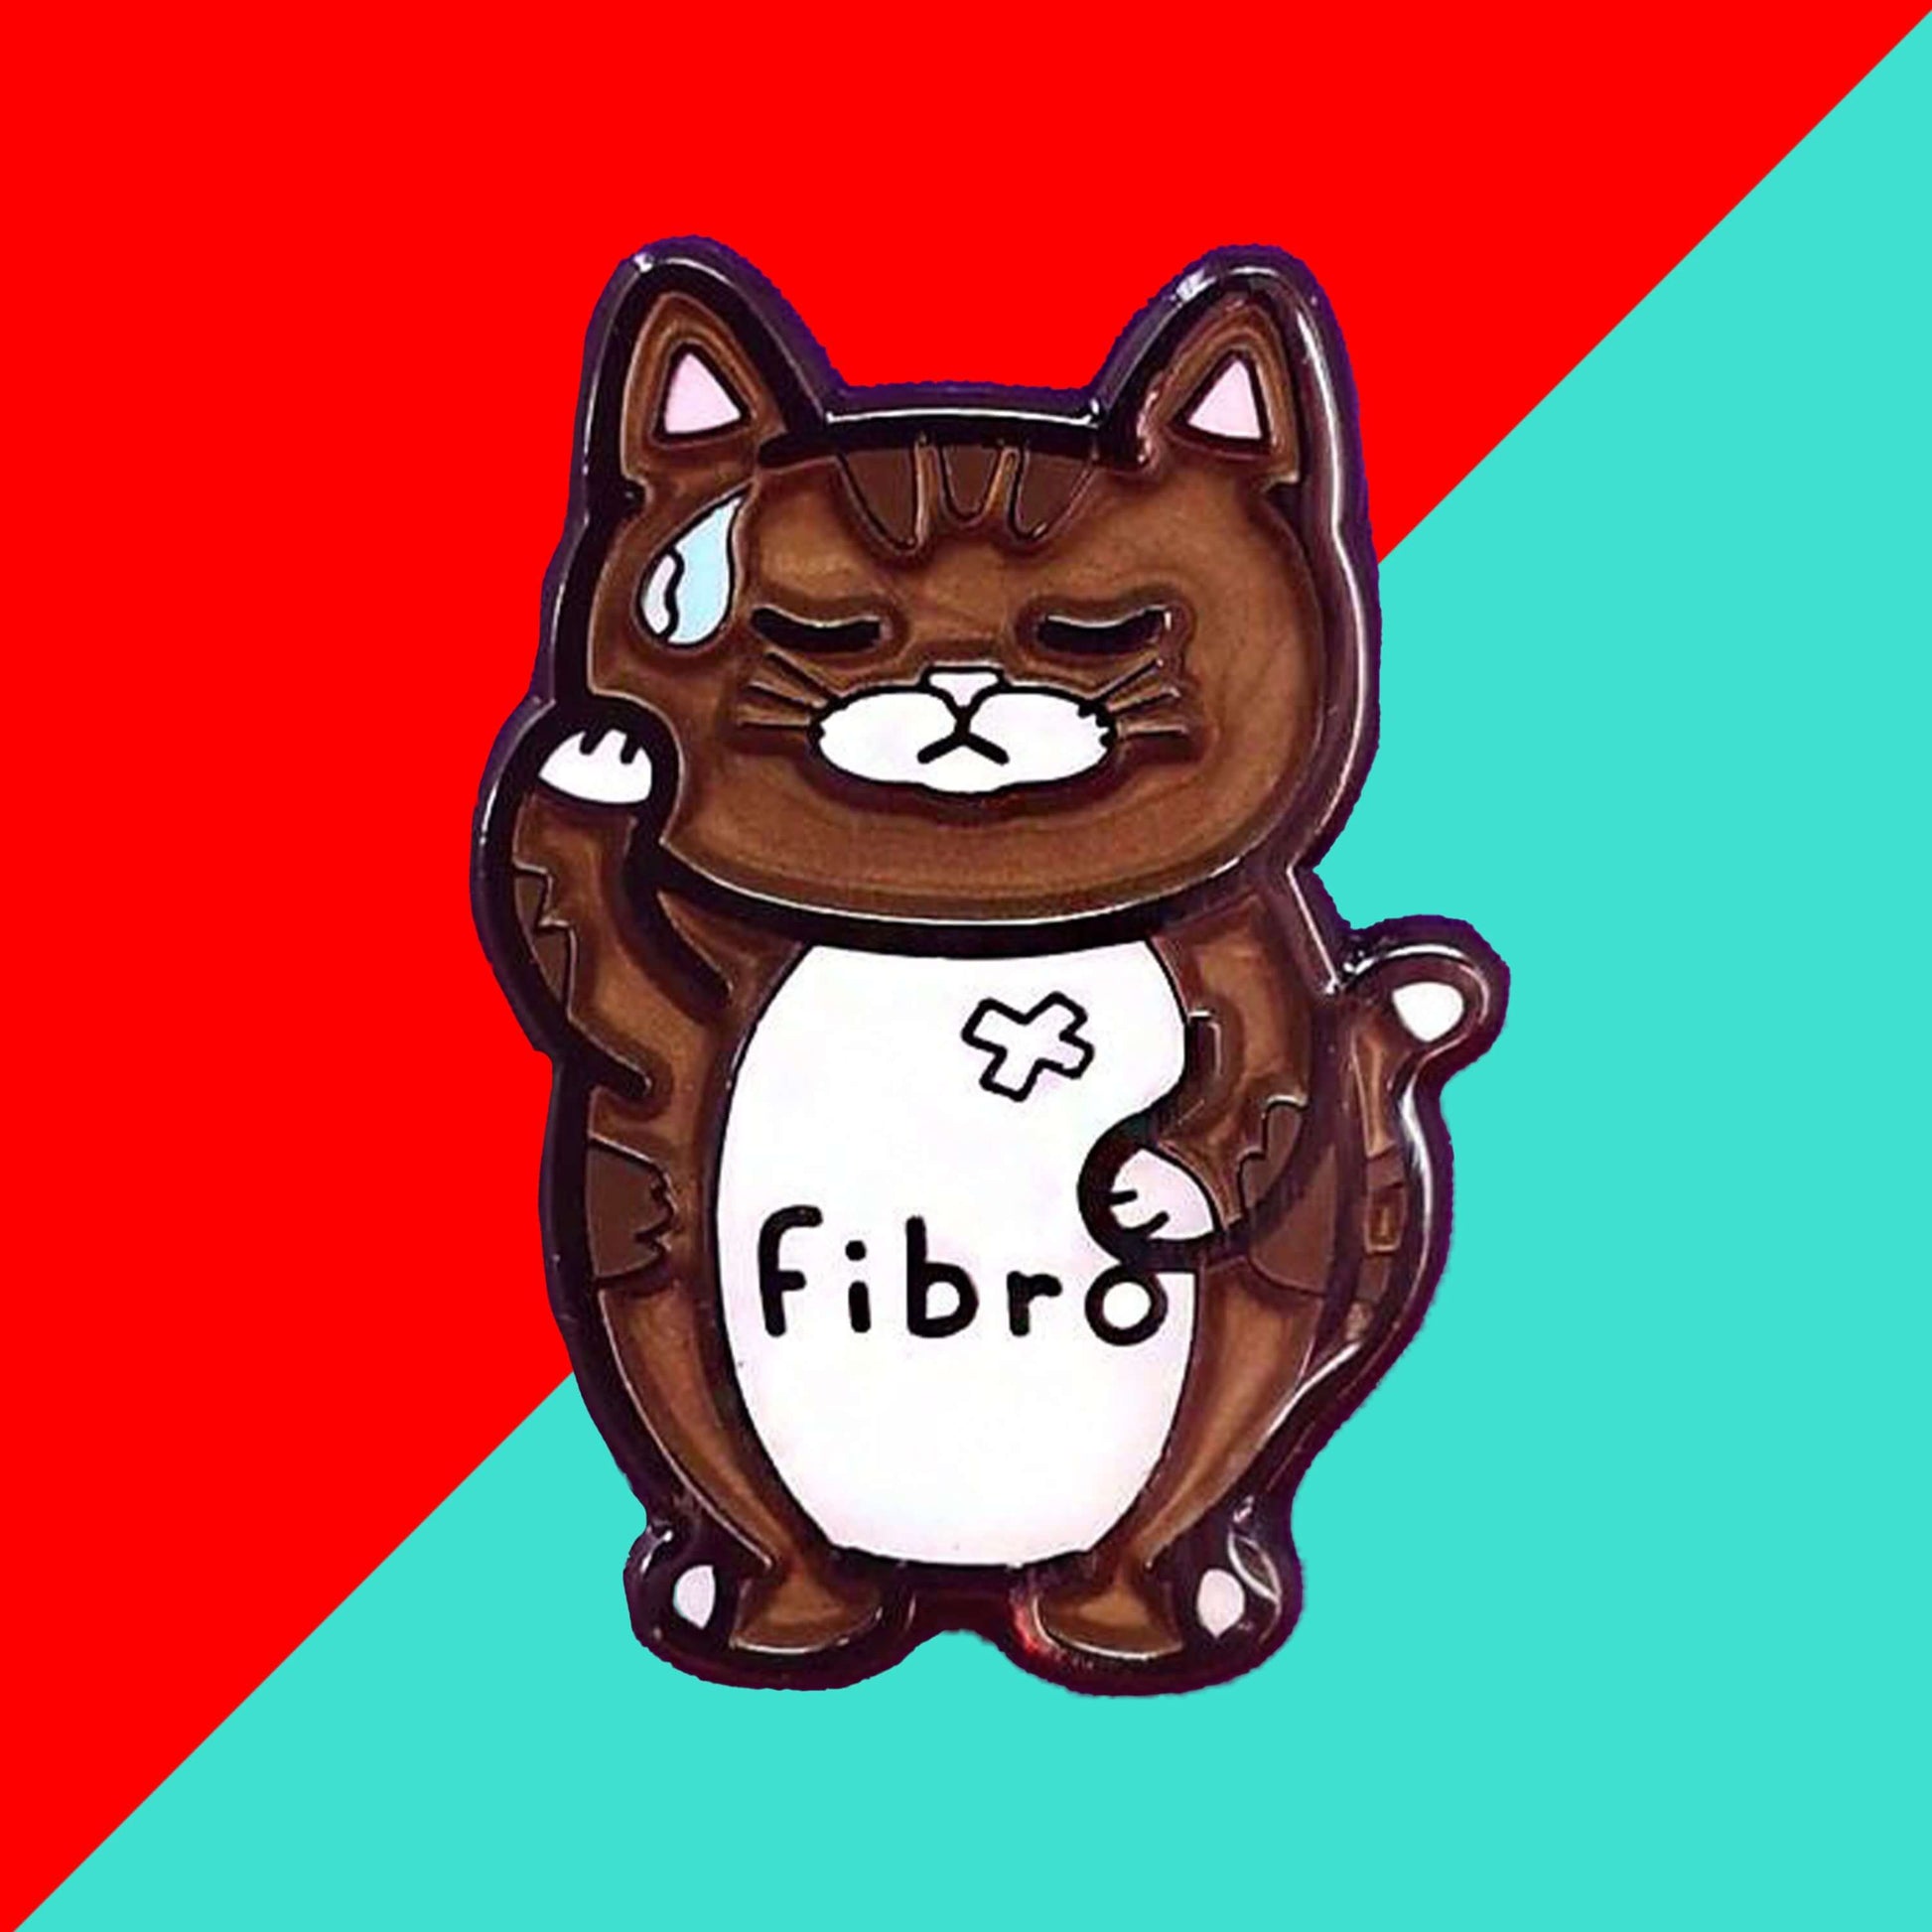 Fibromeowgia Enamel Pin - Fibromyalgia on a red and blue background. The enamel pin is a brown cat with a white stomach with fibro written across it. The cat has its eyes closed, a sweat droplet on its forehead and holding its head in its paw. The enamel pin is designed to raise awareness for fibromyalgia